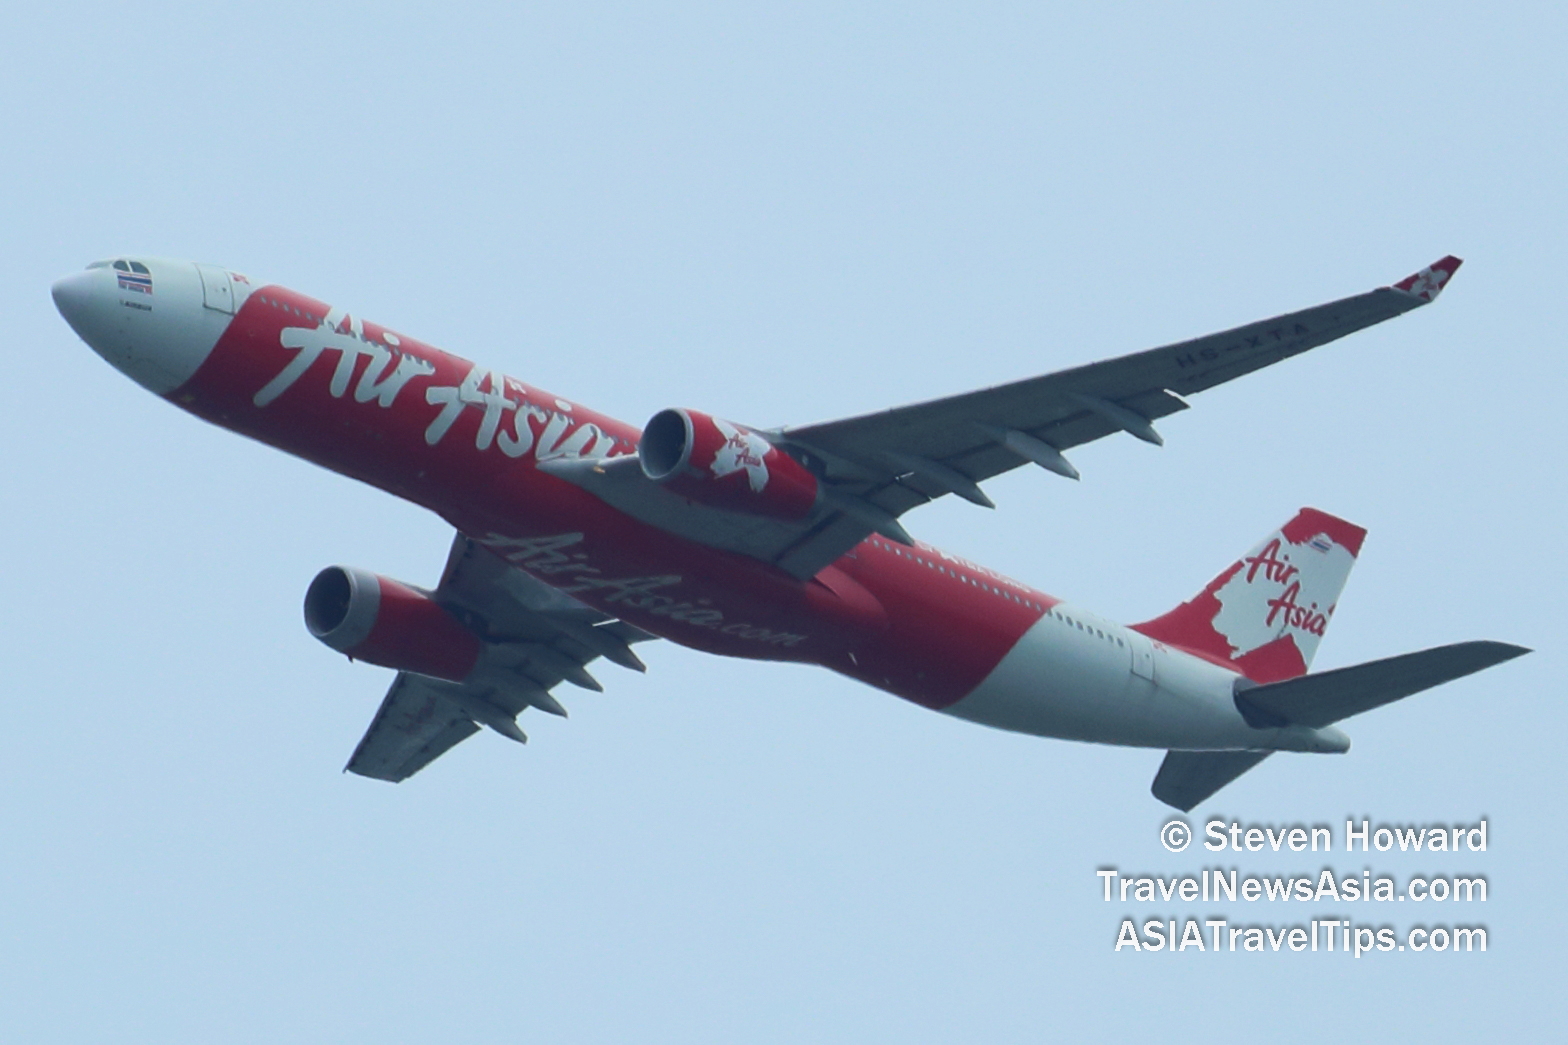 Thai AirAsia X A330 reg: HS-XTA. Picture by Steven Howard of TravelNewsAsia.com Click to enlarge.